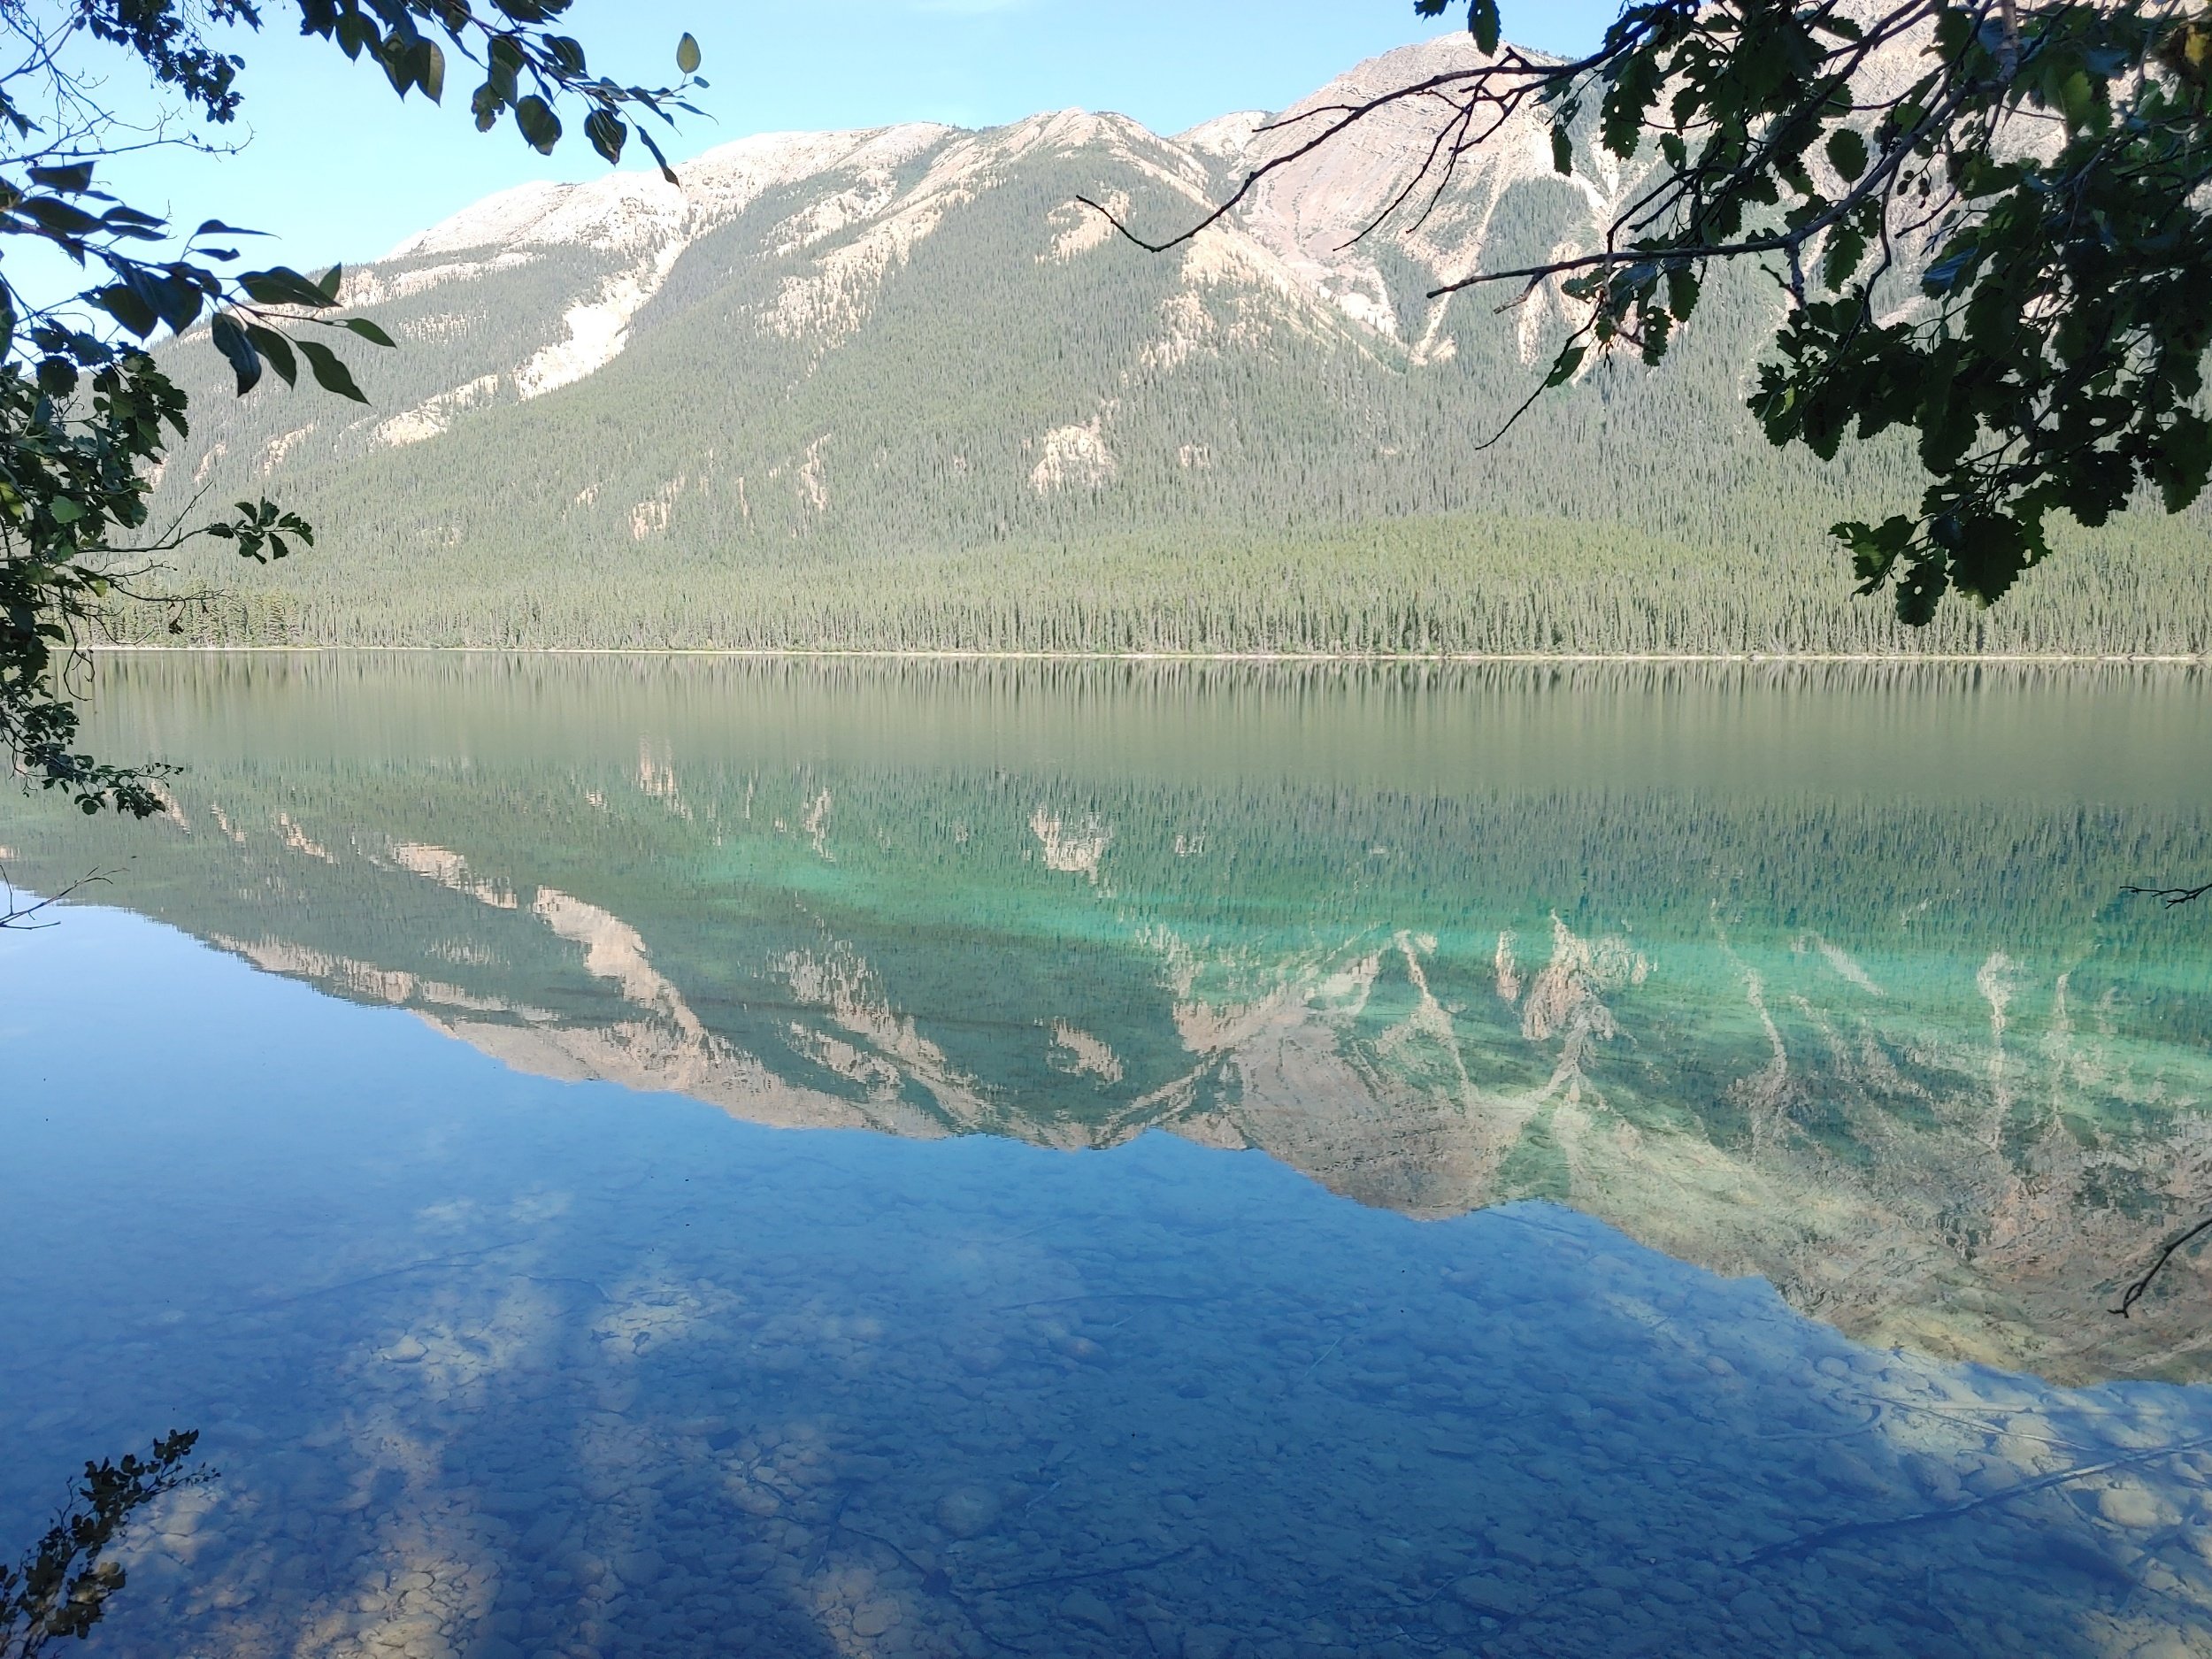  Look at this gorgeous lake I should be thoroughly enjoying! Except the heat, the bugs, the recent memory of leech making me wonder if I am being leeched again, and the boondock site which makes me a little anxious in general [even though I know it t